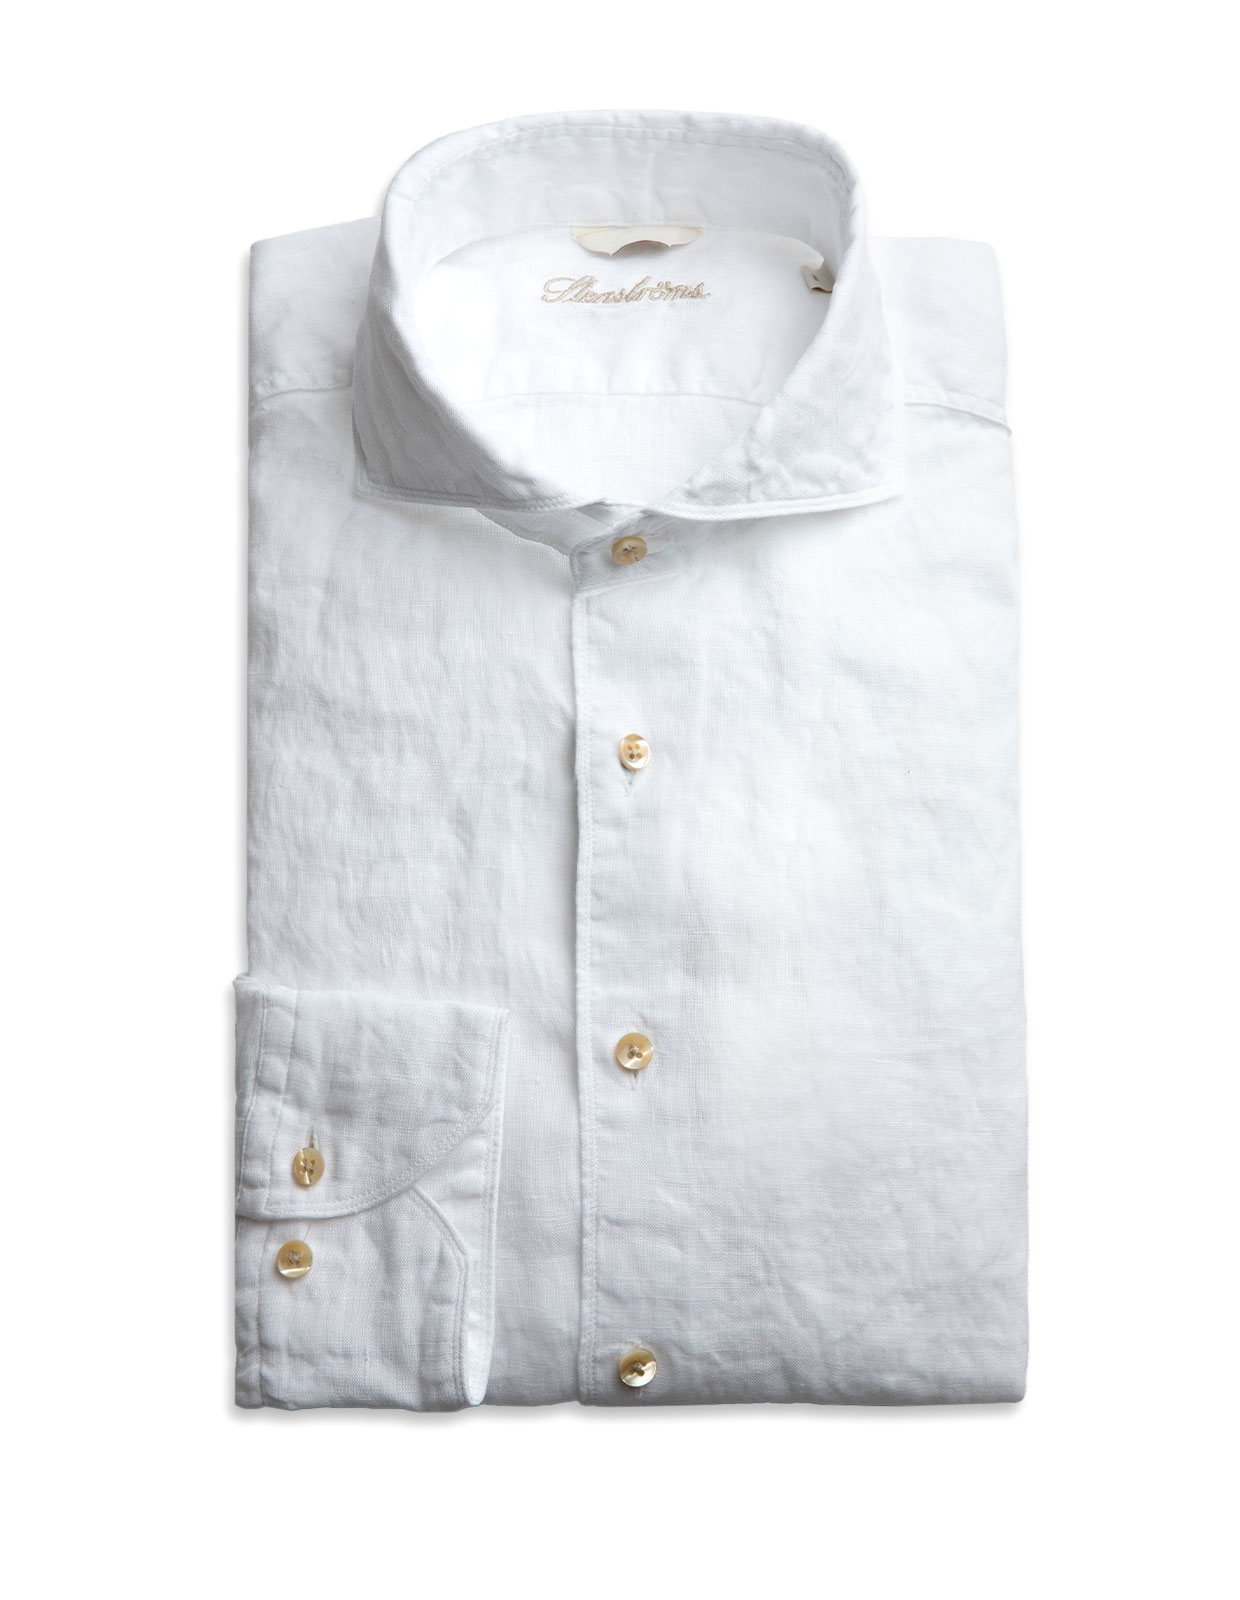 Fitted Body Linen Shirt White Stl XL